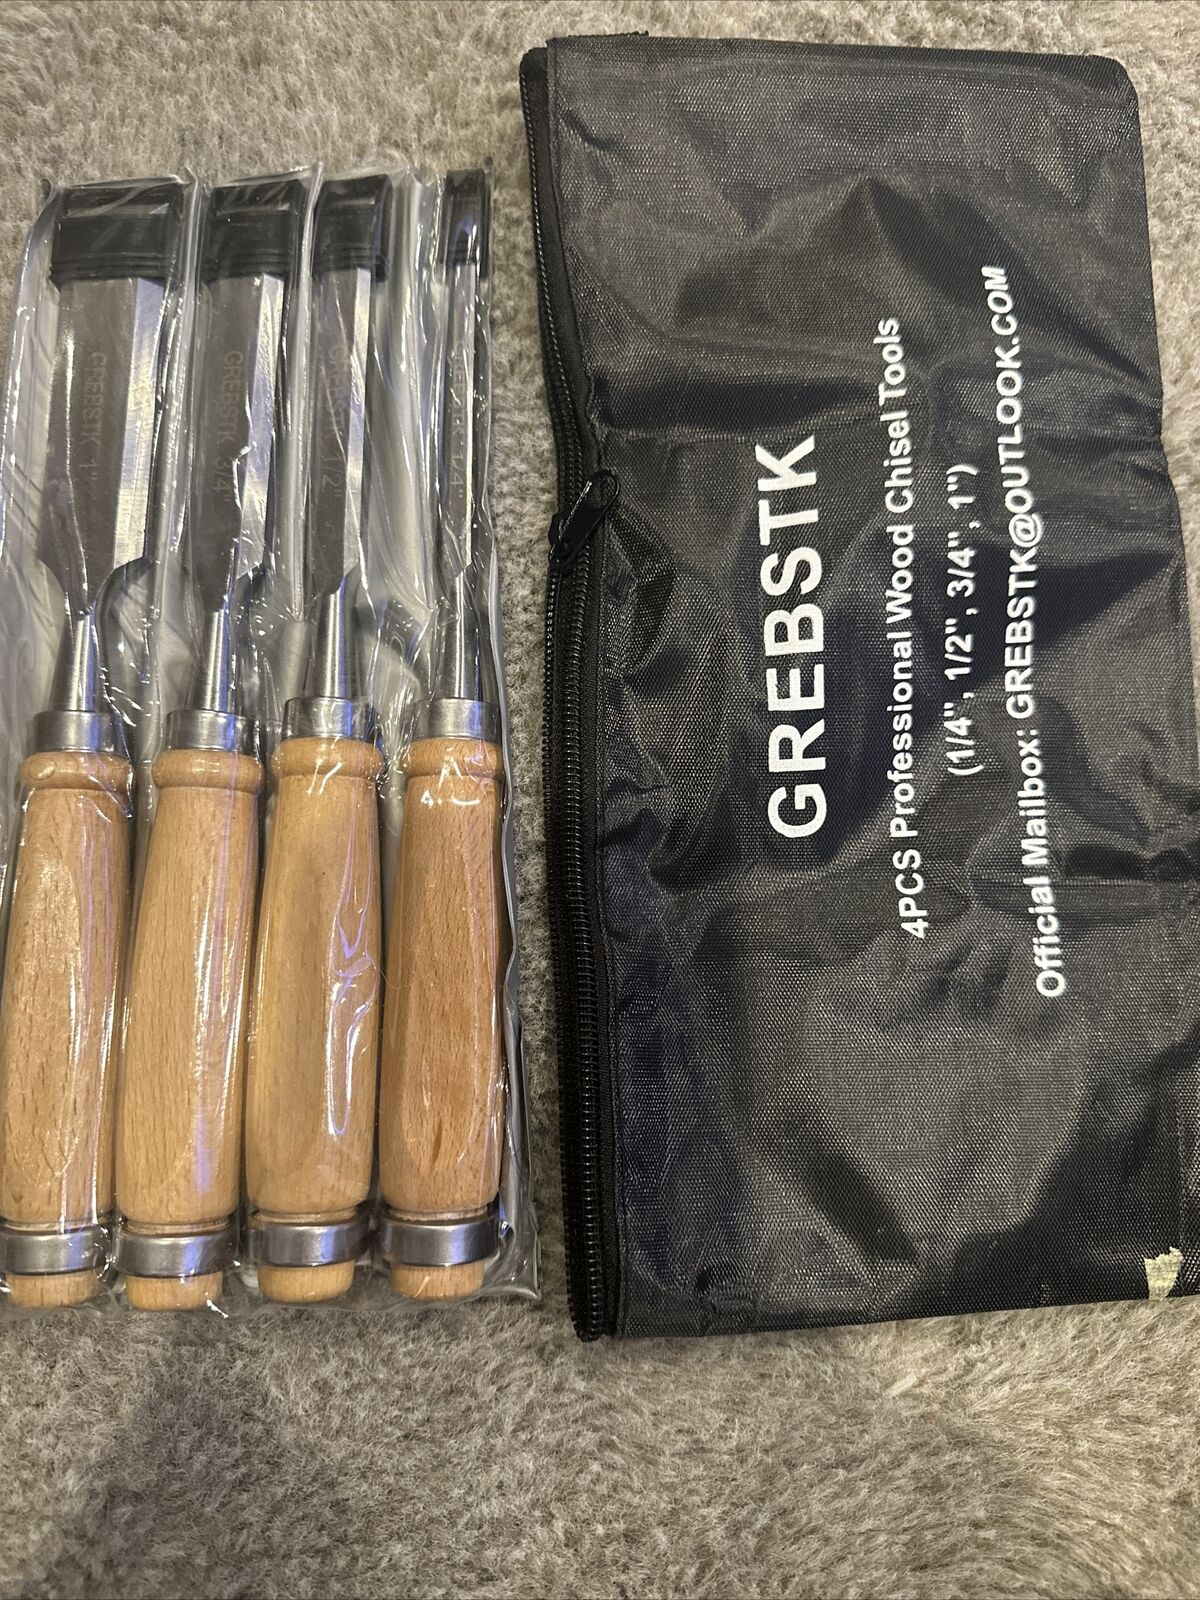 GREBSTK Professional Wood Chisel Set with Oxford Bag for Woodworking, CR-V Steel